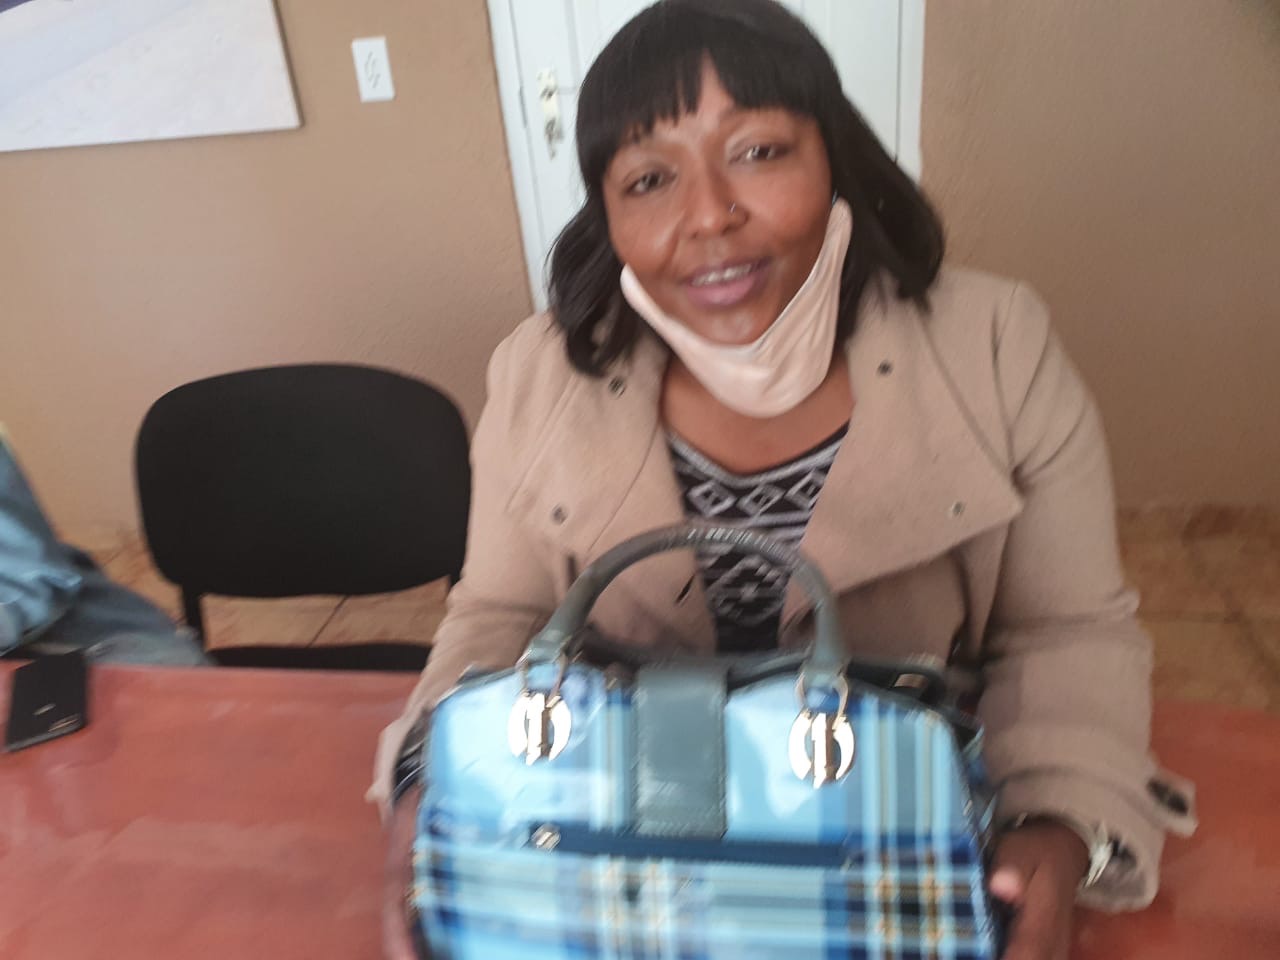 Mrs Kgafela joined The Empowering Institute in 2016 and in 2020 she is very excited as she is buying her first 34 ton side tipper truck. Mrs Kgafela says: “I Believe In Empisa”.